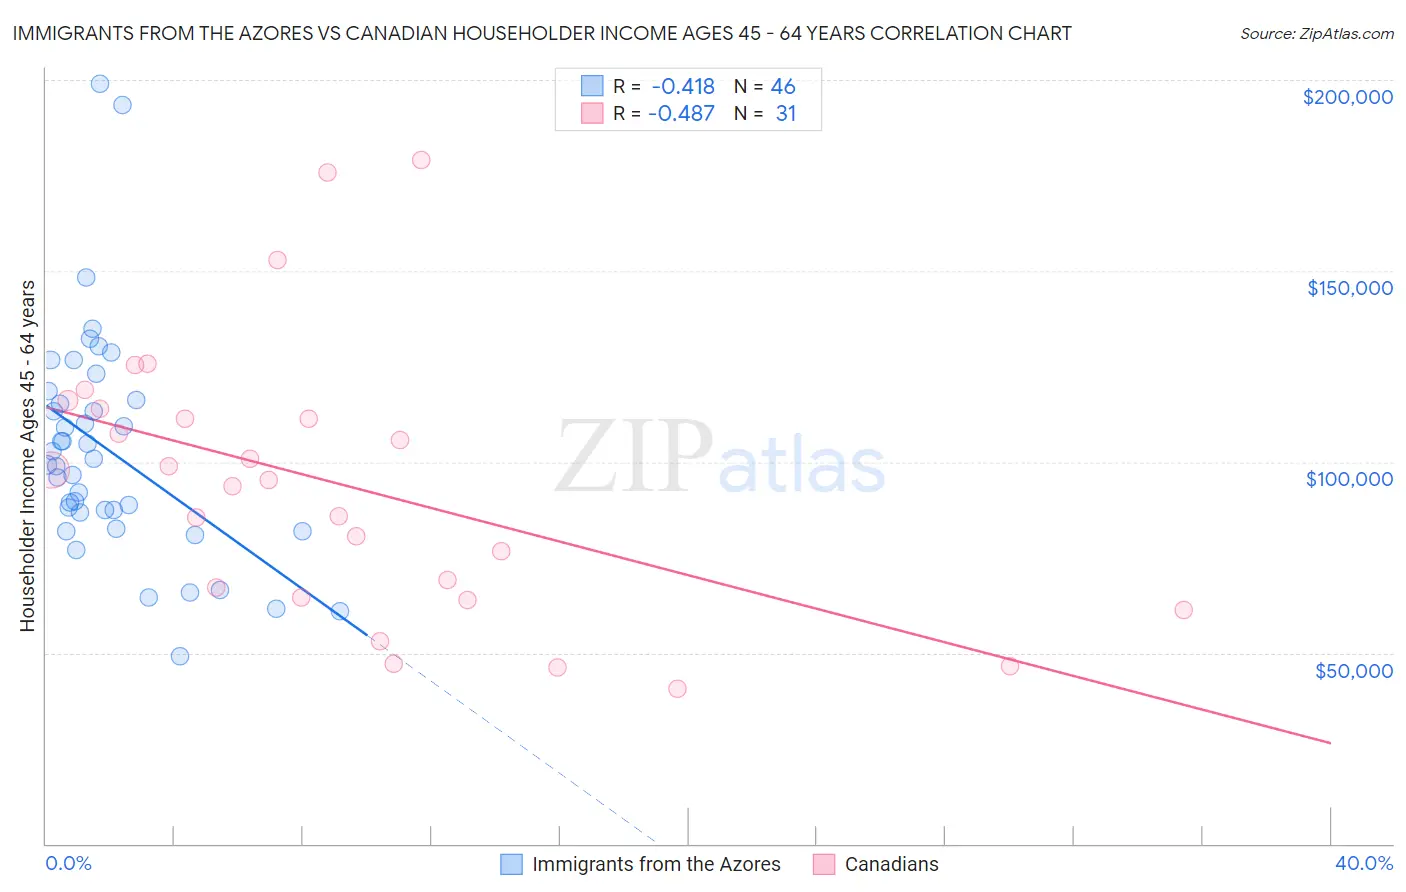 Immigrants from the Azores vs Canadian Householder Income Ages 45 - 64 years